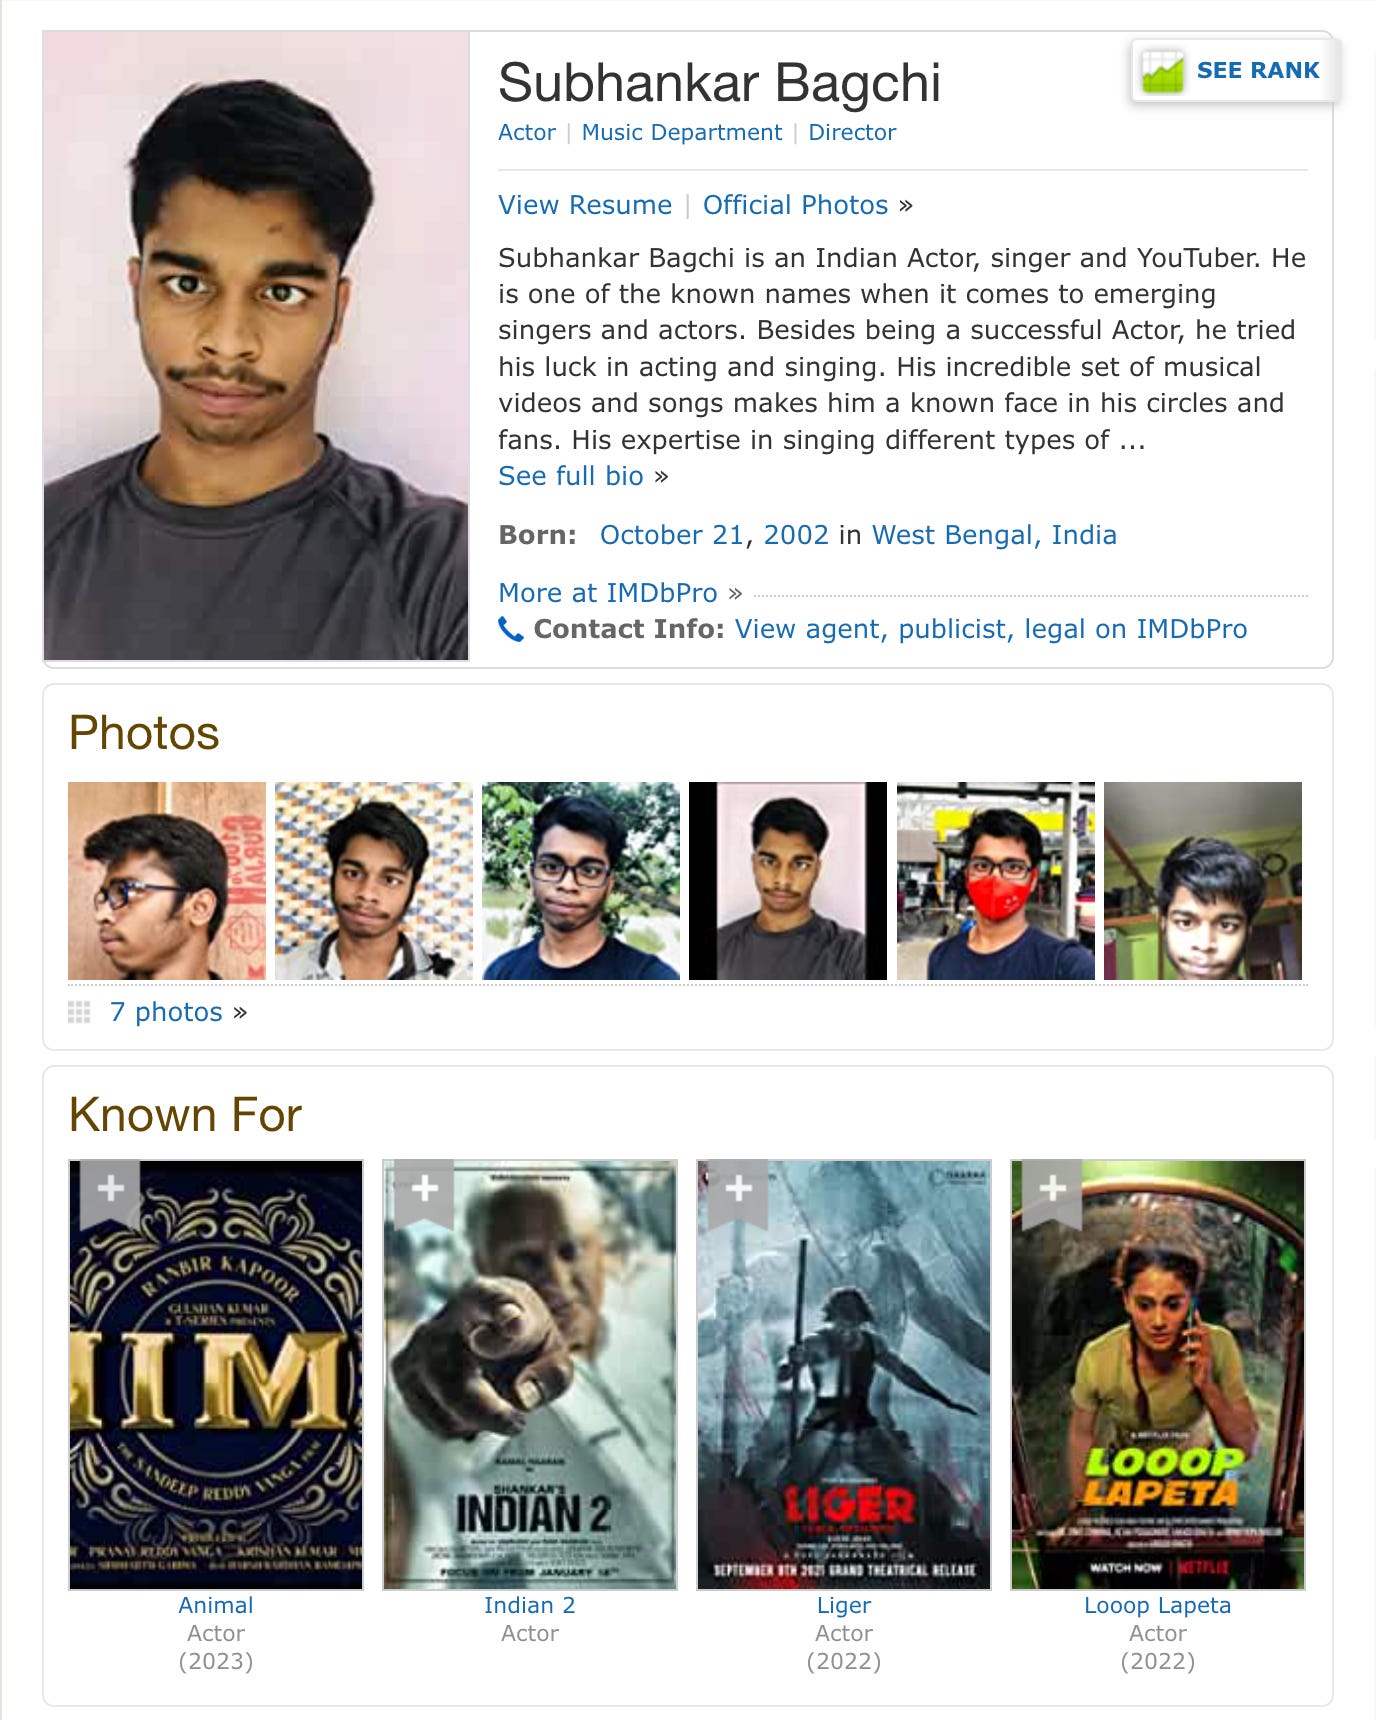 Out of curiosity, I went to IMDb to see if the cast list for